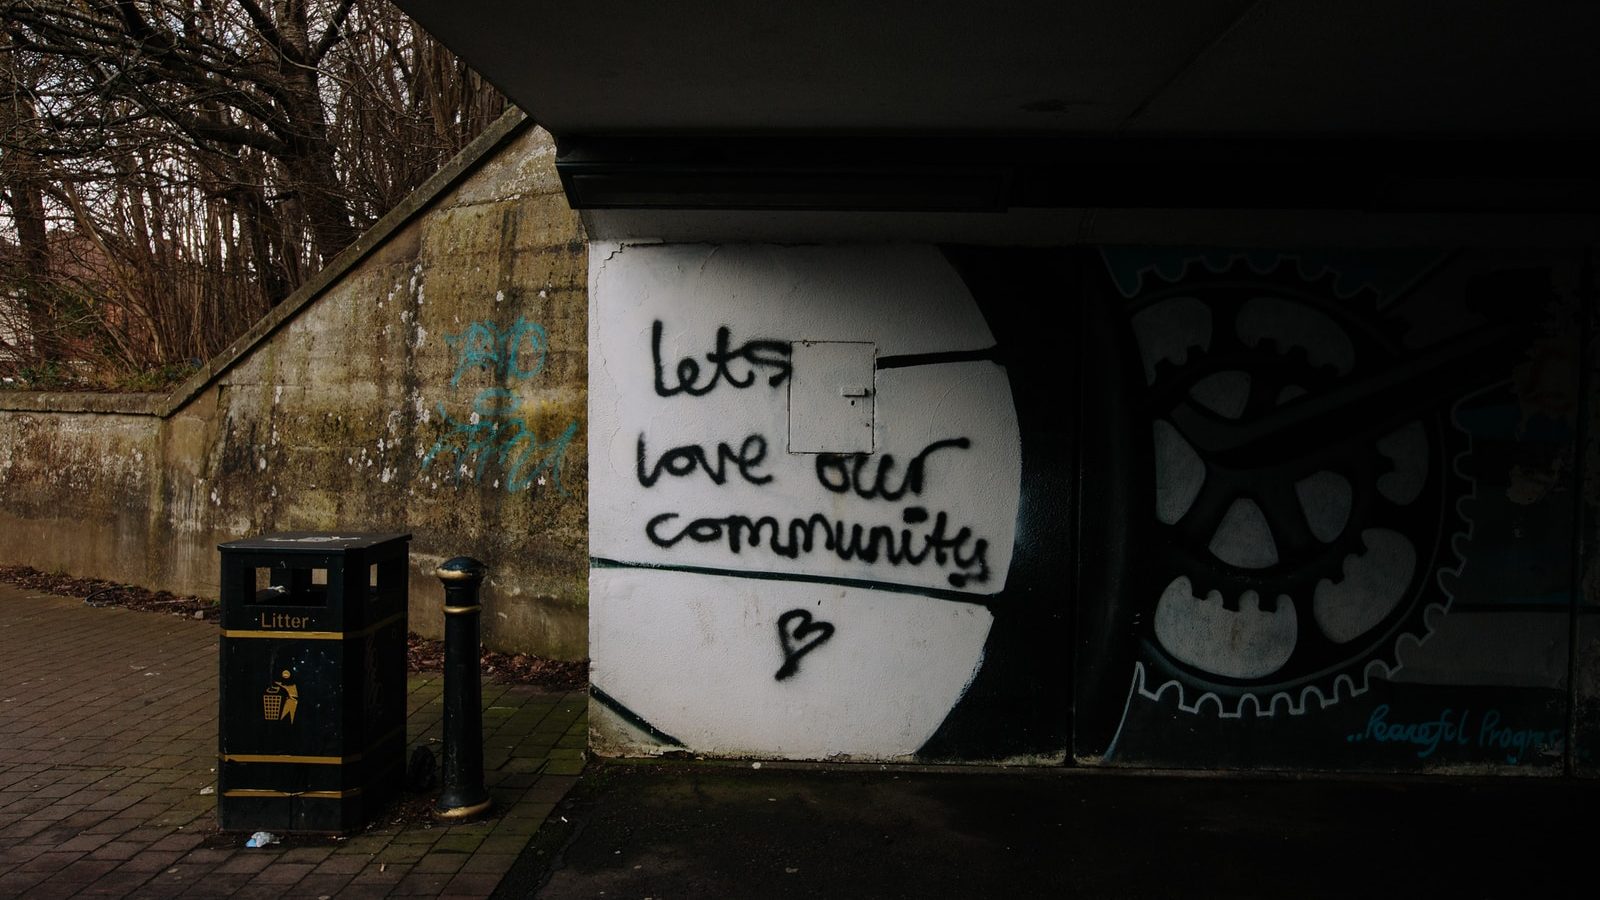 lets love over community text wall